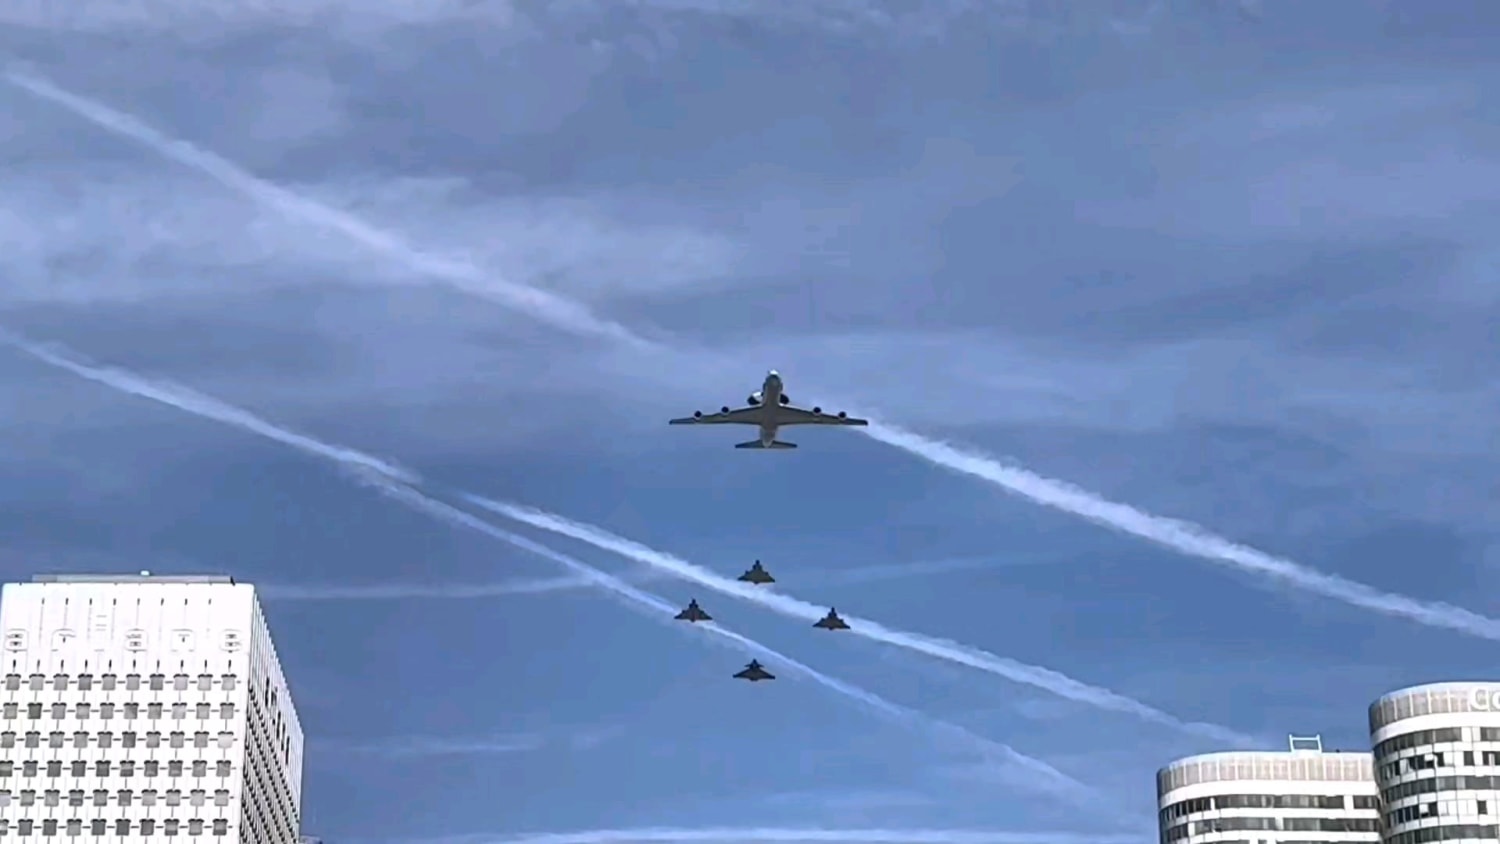 14th of July (Bastille Day) air parade earlier today in Paris, France